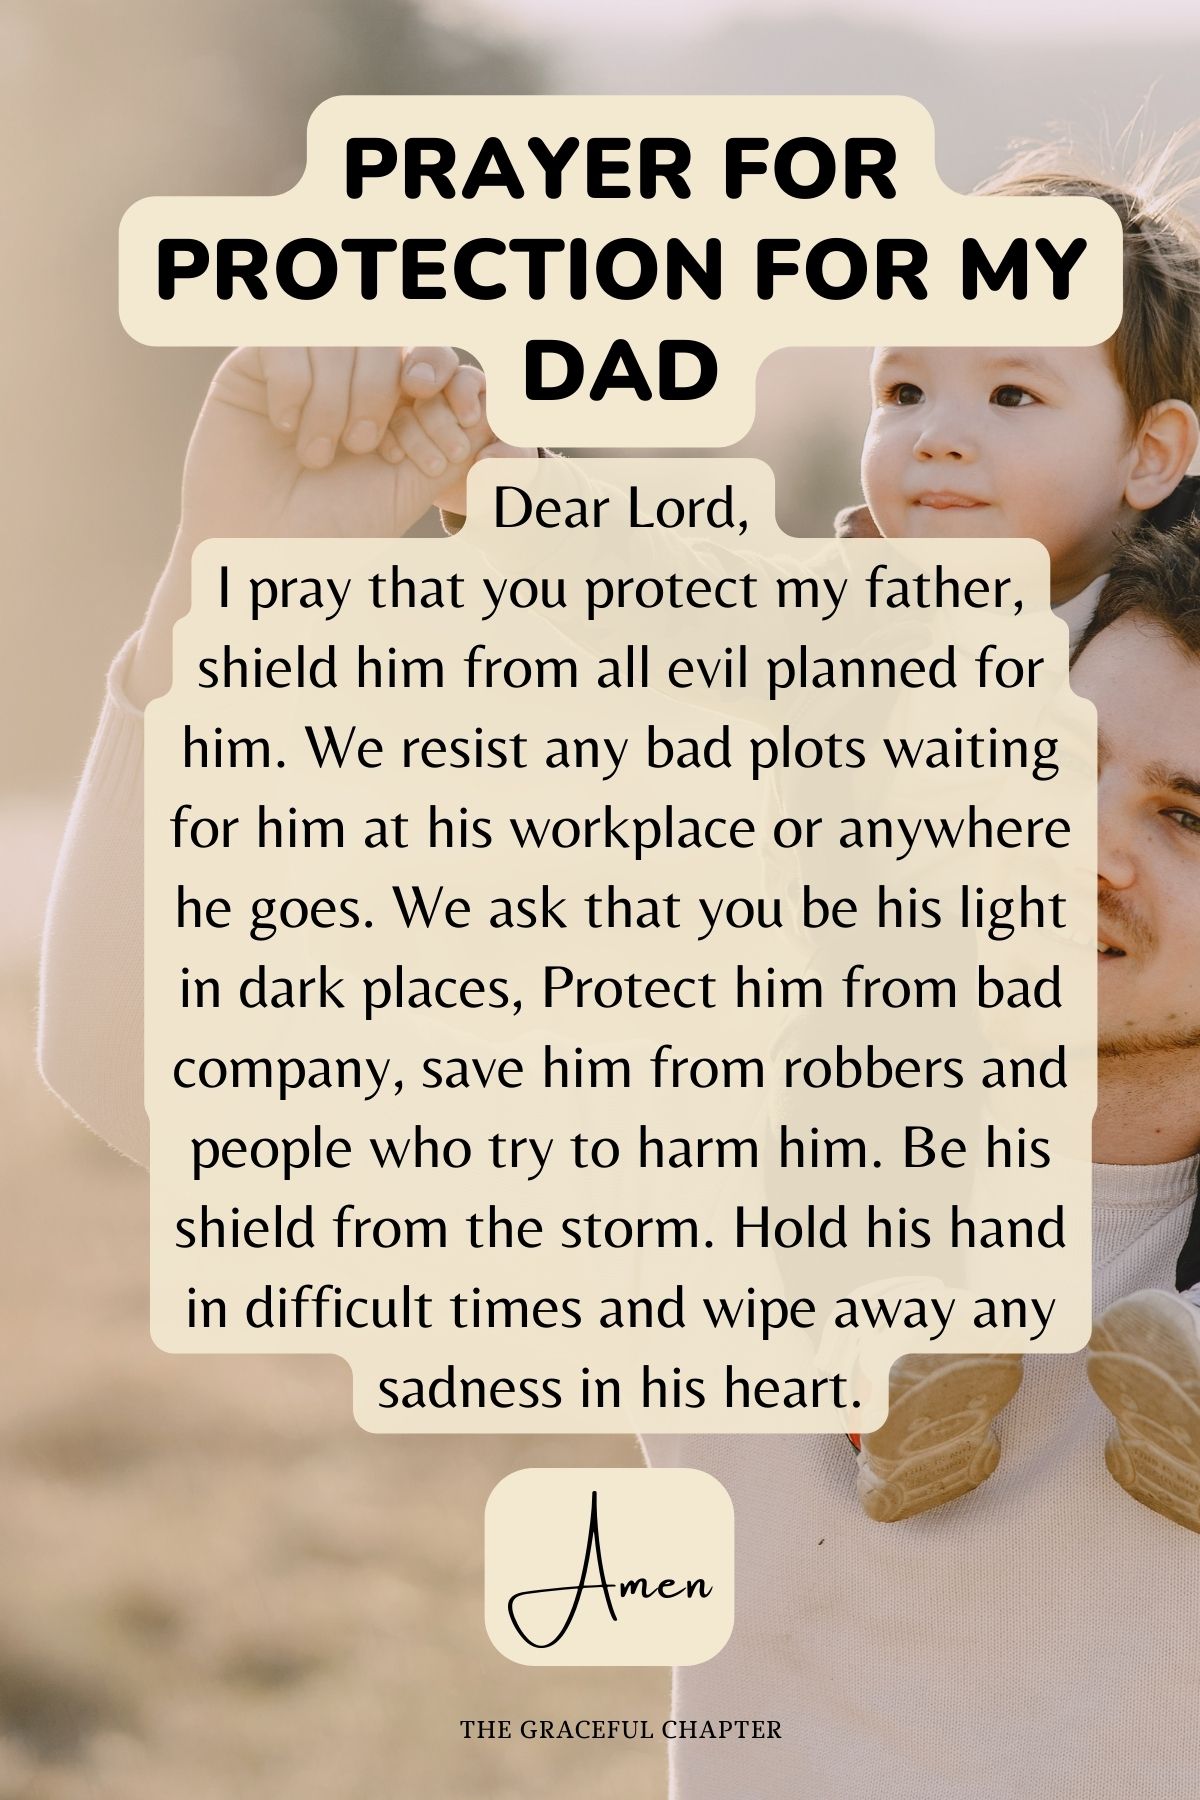 Prayer for protection for my dad